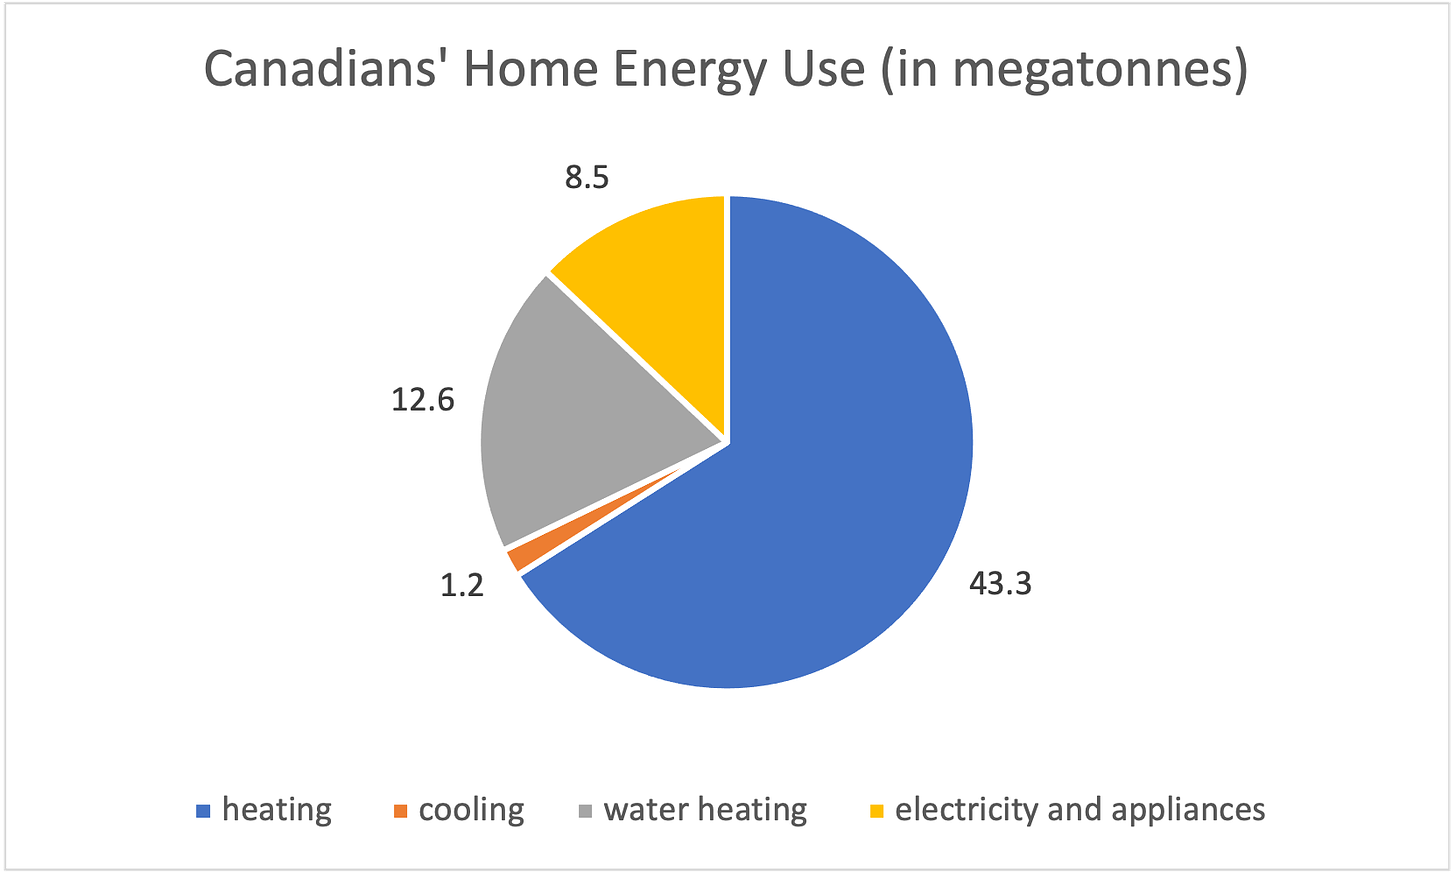 Pie chart data on Canadians' energy use: 43.3 mt for home heating, 1.2 mt for cooling, 12.6 mt for water heating, 8.5 mt for appliances